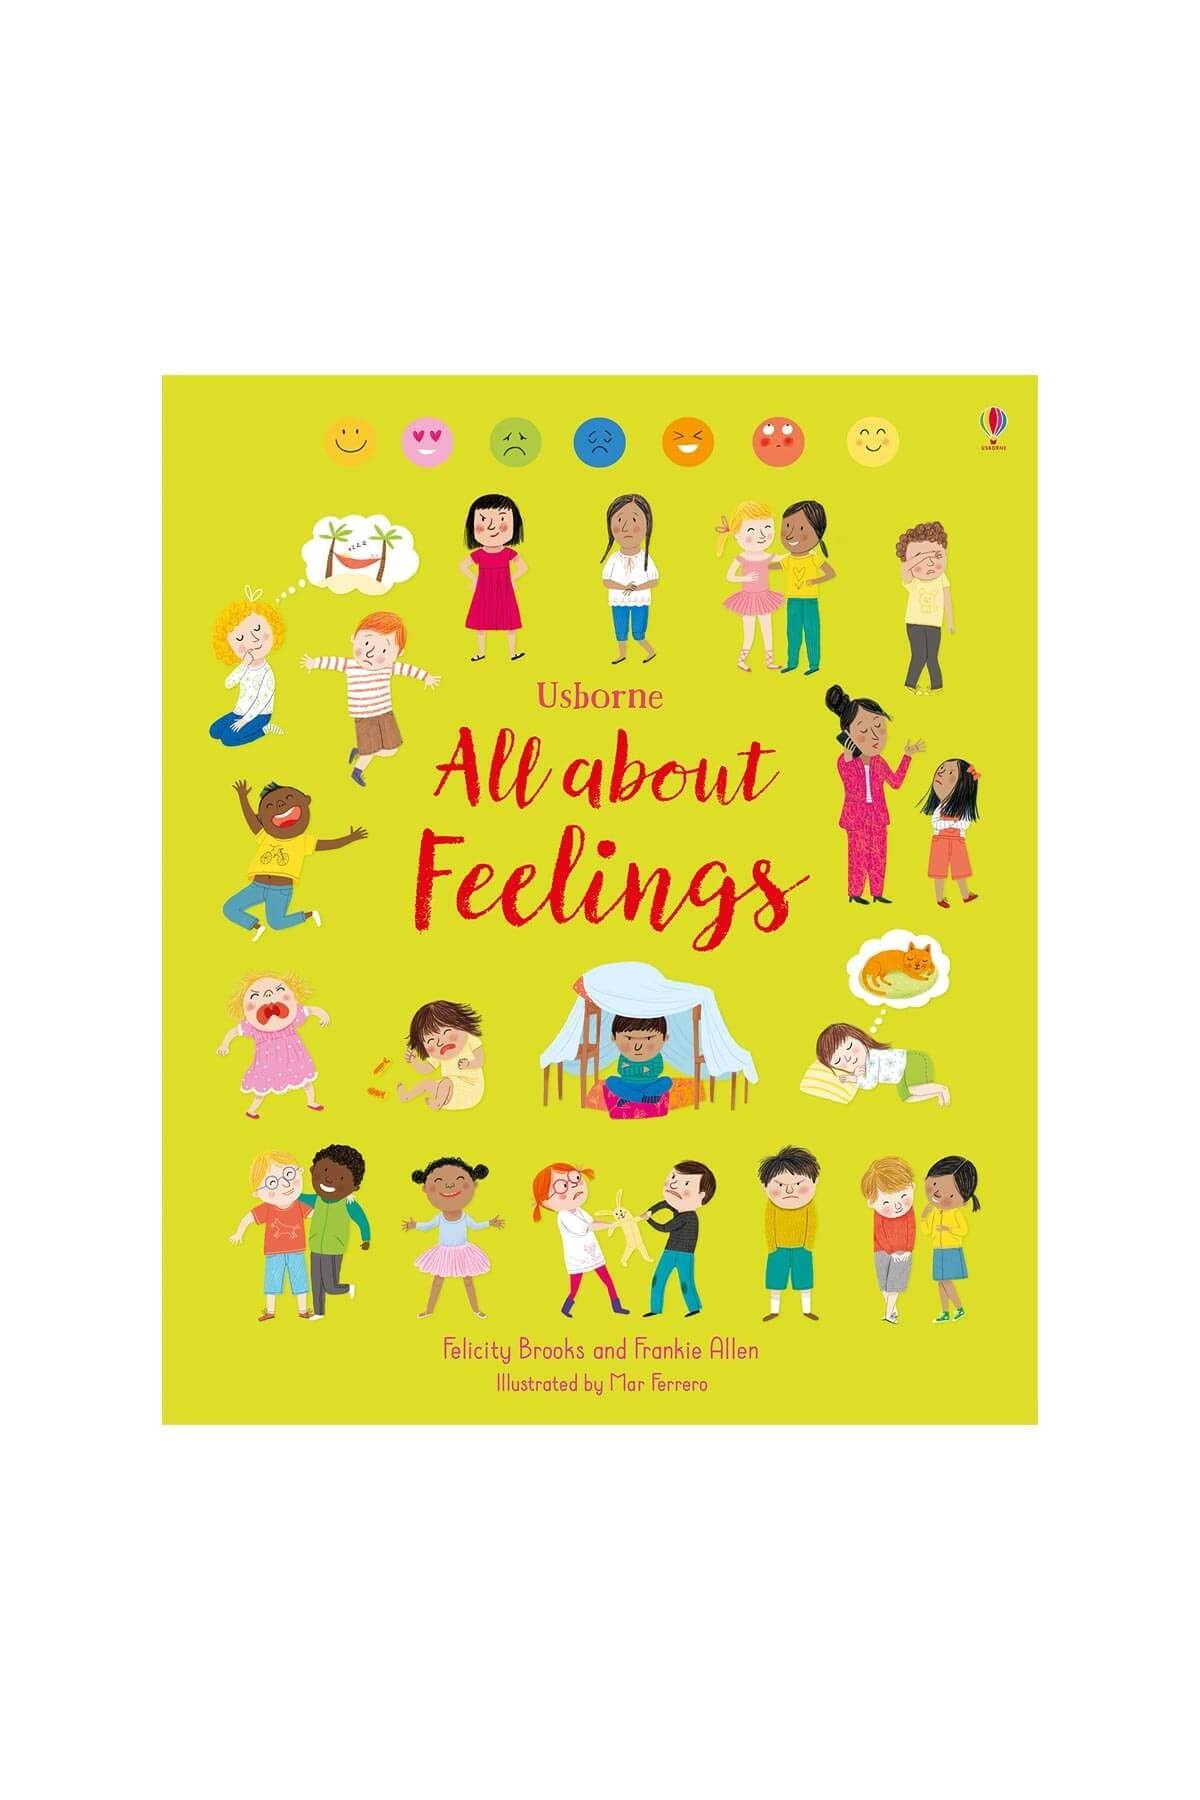 The Usborne All About Feelings